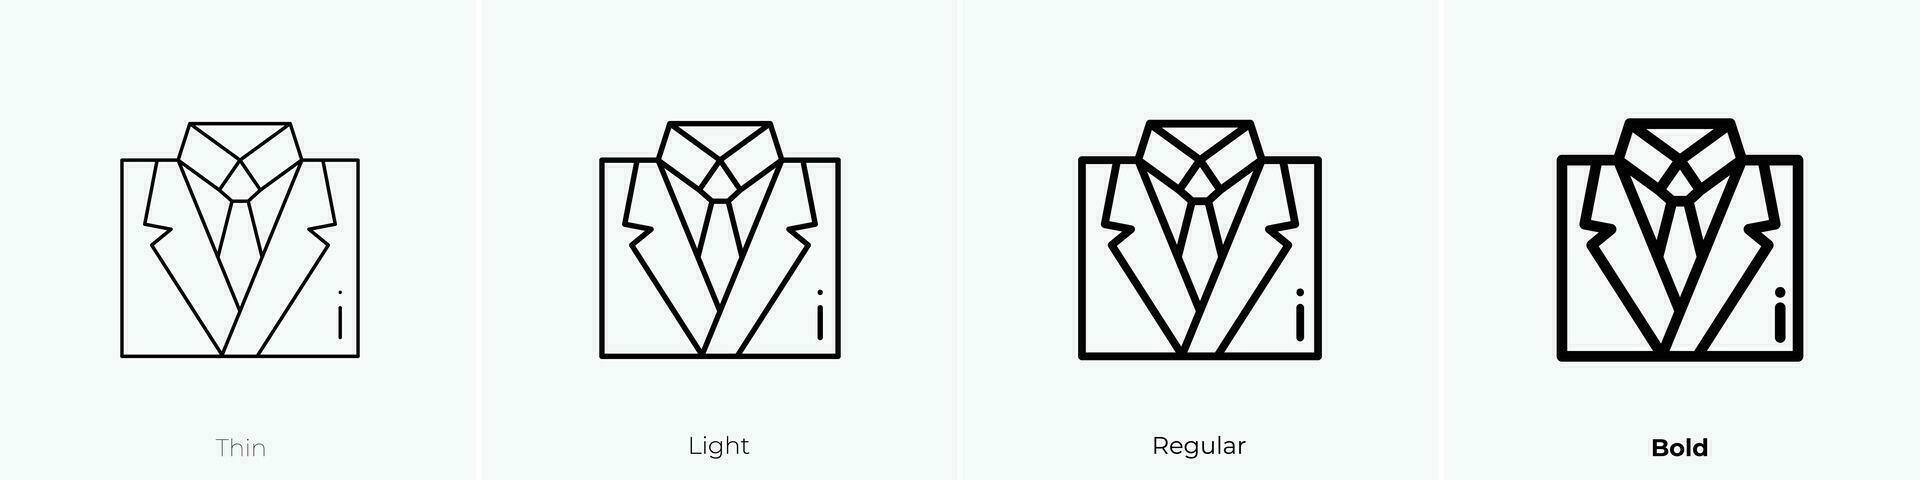 suit icon. Thin, Light, Regular And Bold style design isolated on white background vector